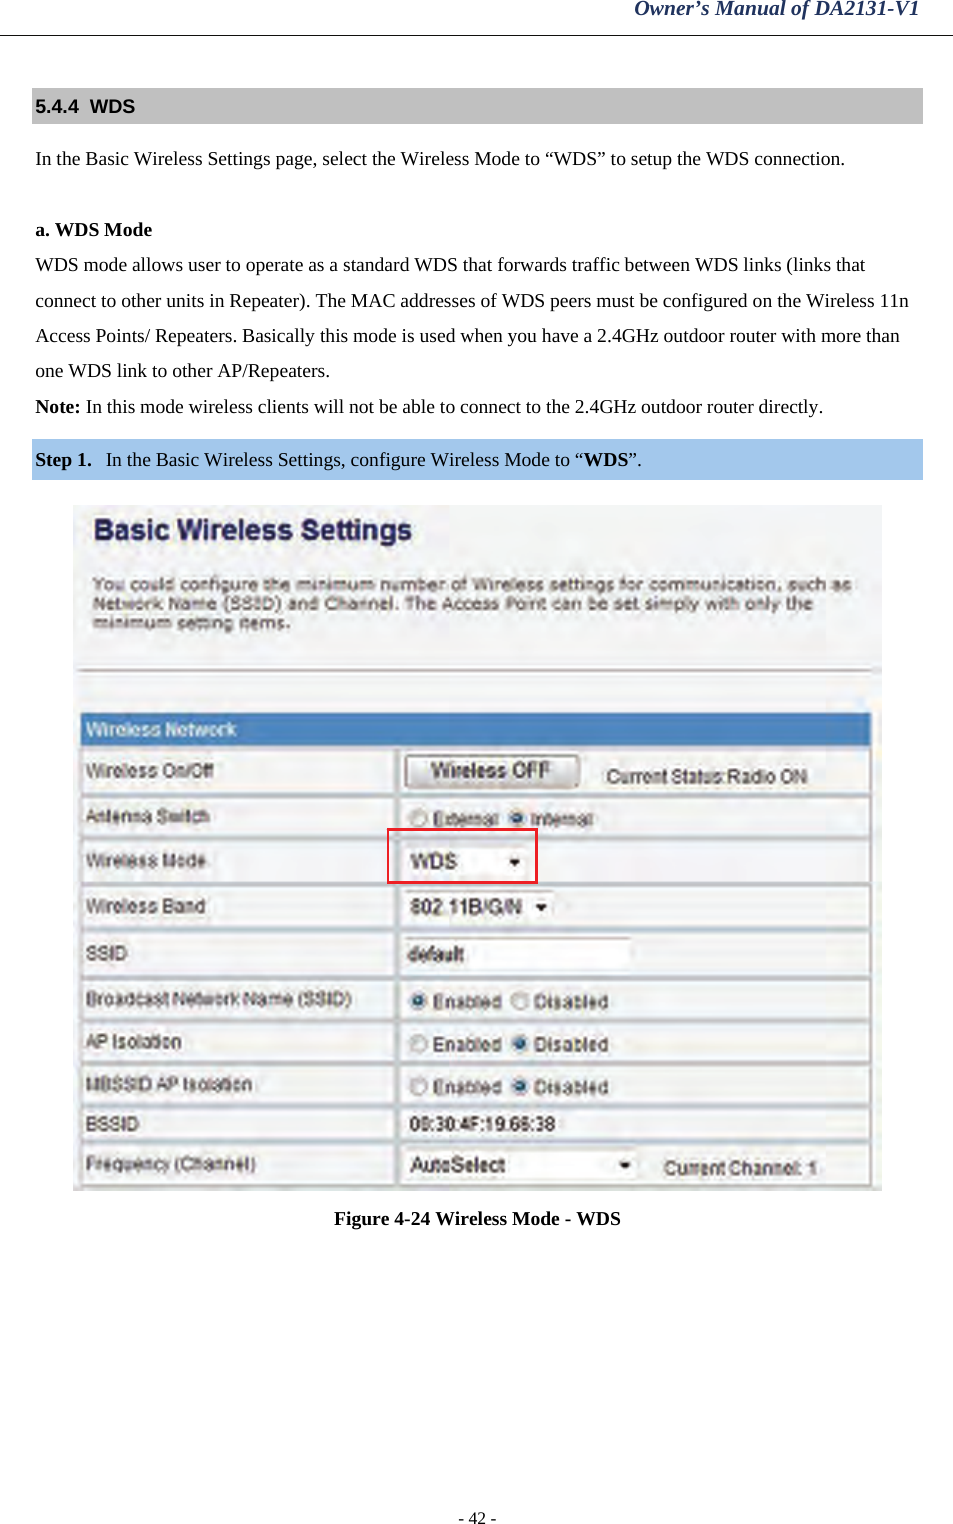 Owner’s Manual of DA2131-V1 - 42 - 5.4.4  WDS   In the Basic Wireless Settings page, select the Wireless Mode to “WDS” to setup the WDS connection.   a. WDS Mode WDS mode allows user to operate as a standard WDS that forwards traffic between WDS links (links that connect to other units in Repeater). The MAC addresses of WDS peers must be configured on the Wireless 11n Access Points/ Repeaters. Basically this mode is used when you have a 2.4GHz outdoor router with more than one WDS link to other AP/Repeaters.  Note: In this mode wireless clients will not be able to connect to the 2.4GHz outdoor router directly. Step 1. In the Basic Wireless Settings, configure Wireless Mode to “WDS”.   Figure 4-24 Wireless Mode - WDS 